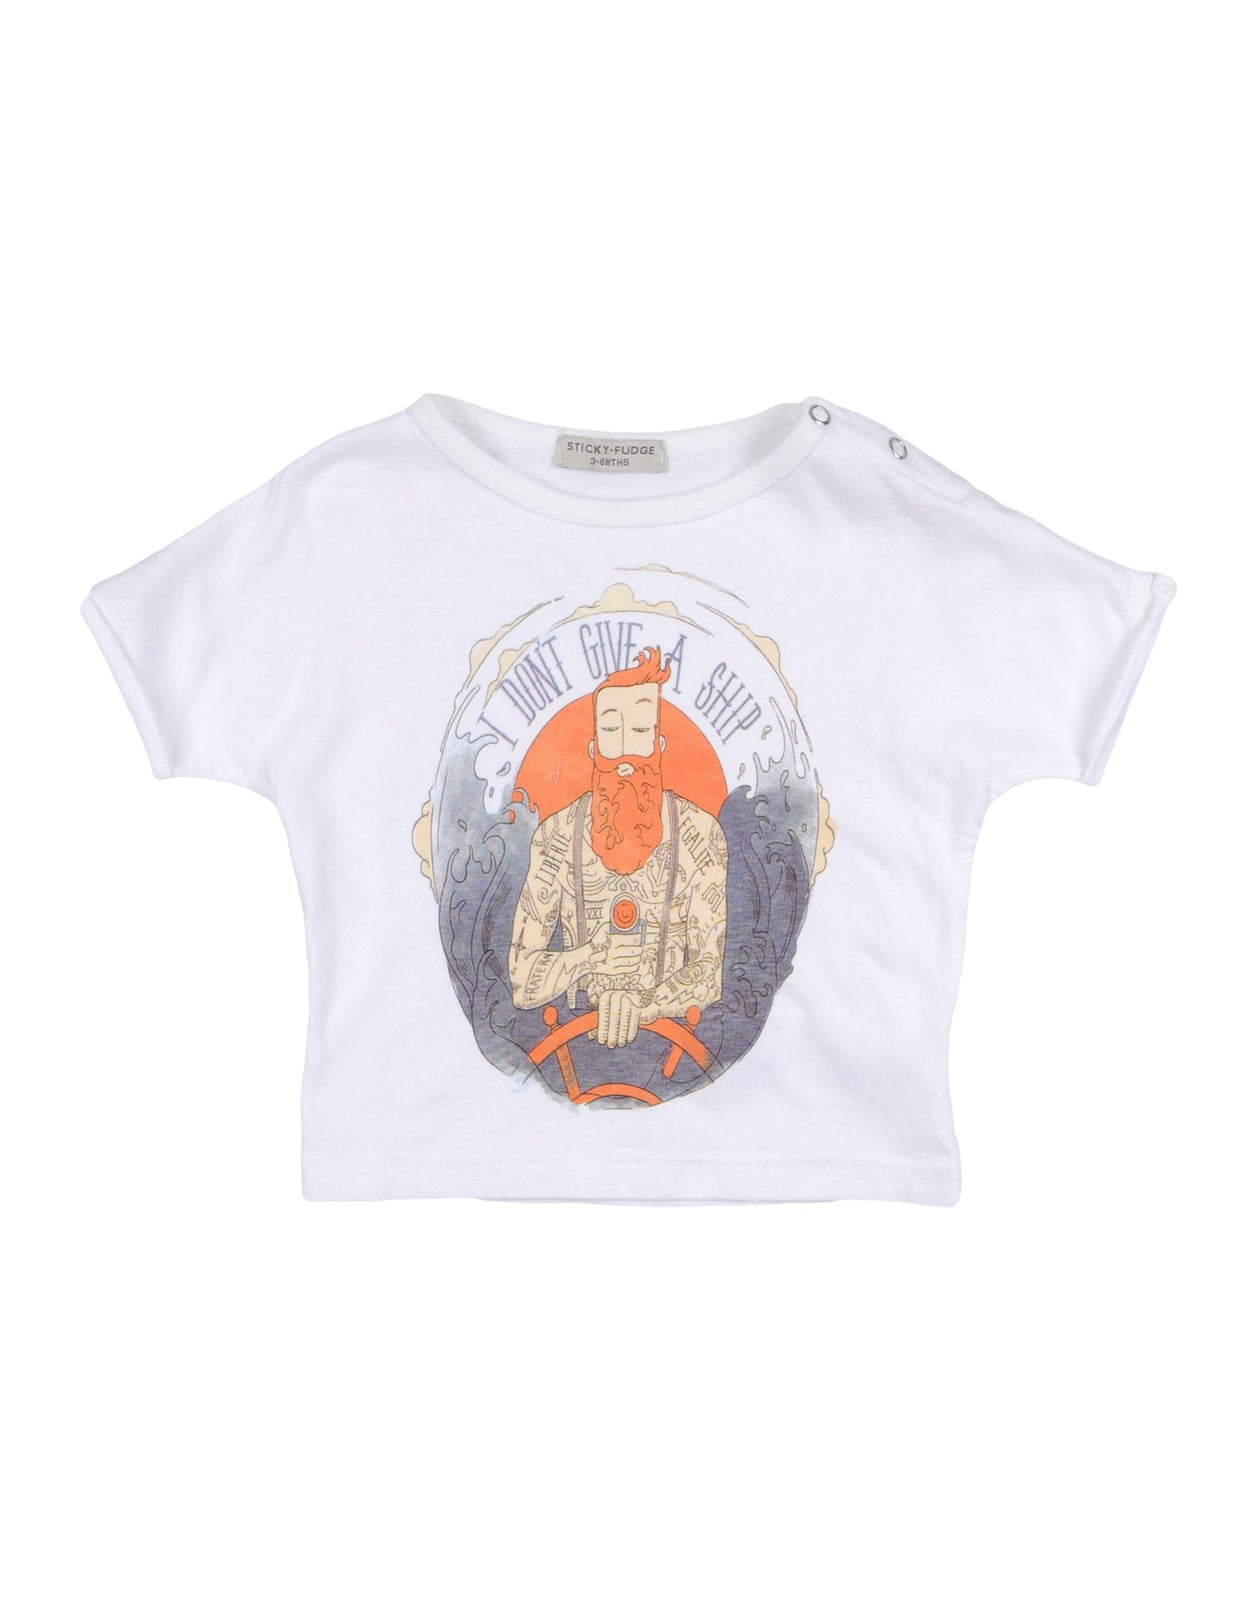 STICKY FUDGE T-Shirt Top Size 6-12M Printed 'I DON'T GIVE A SHIP' Front gallery main photo